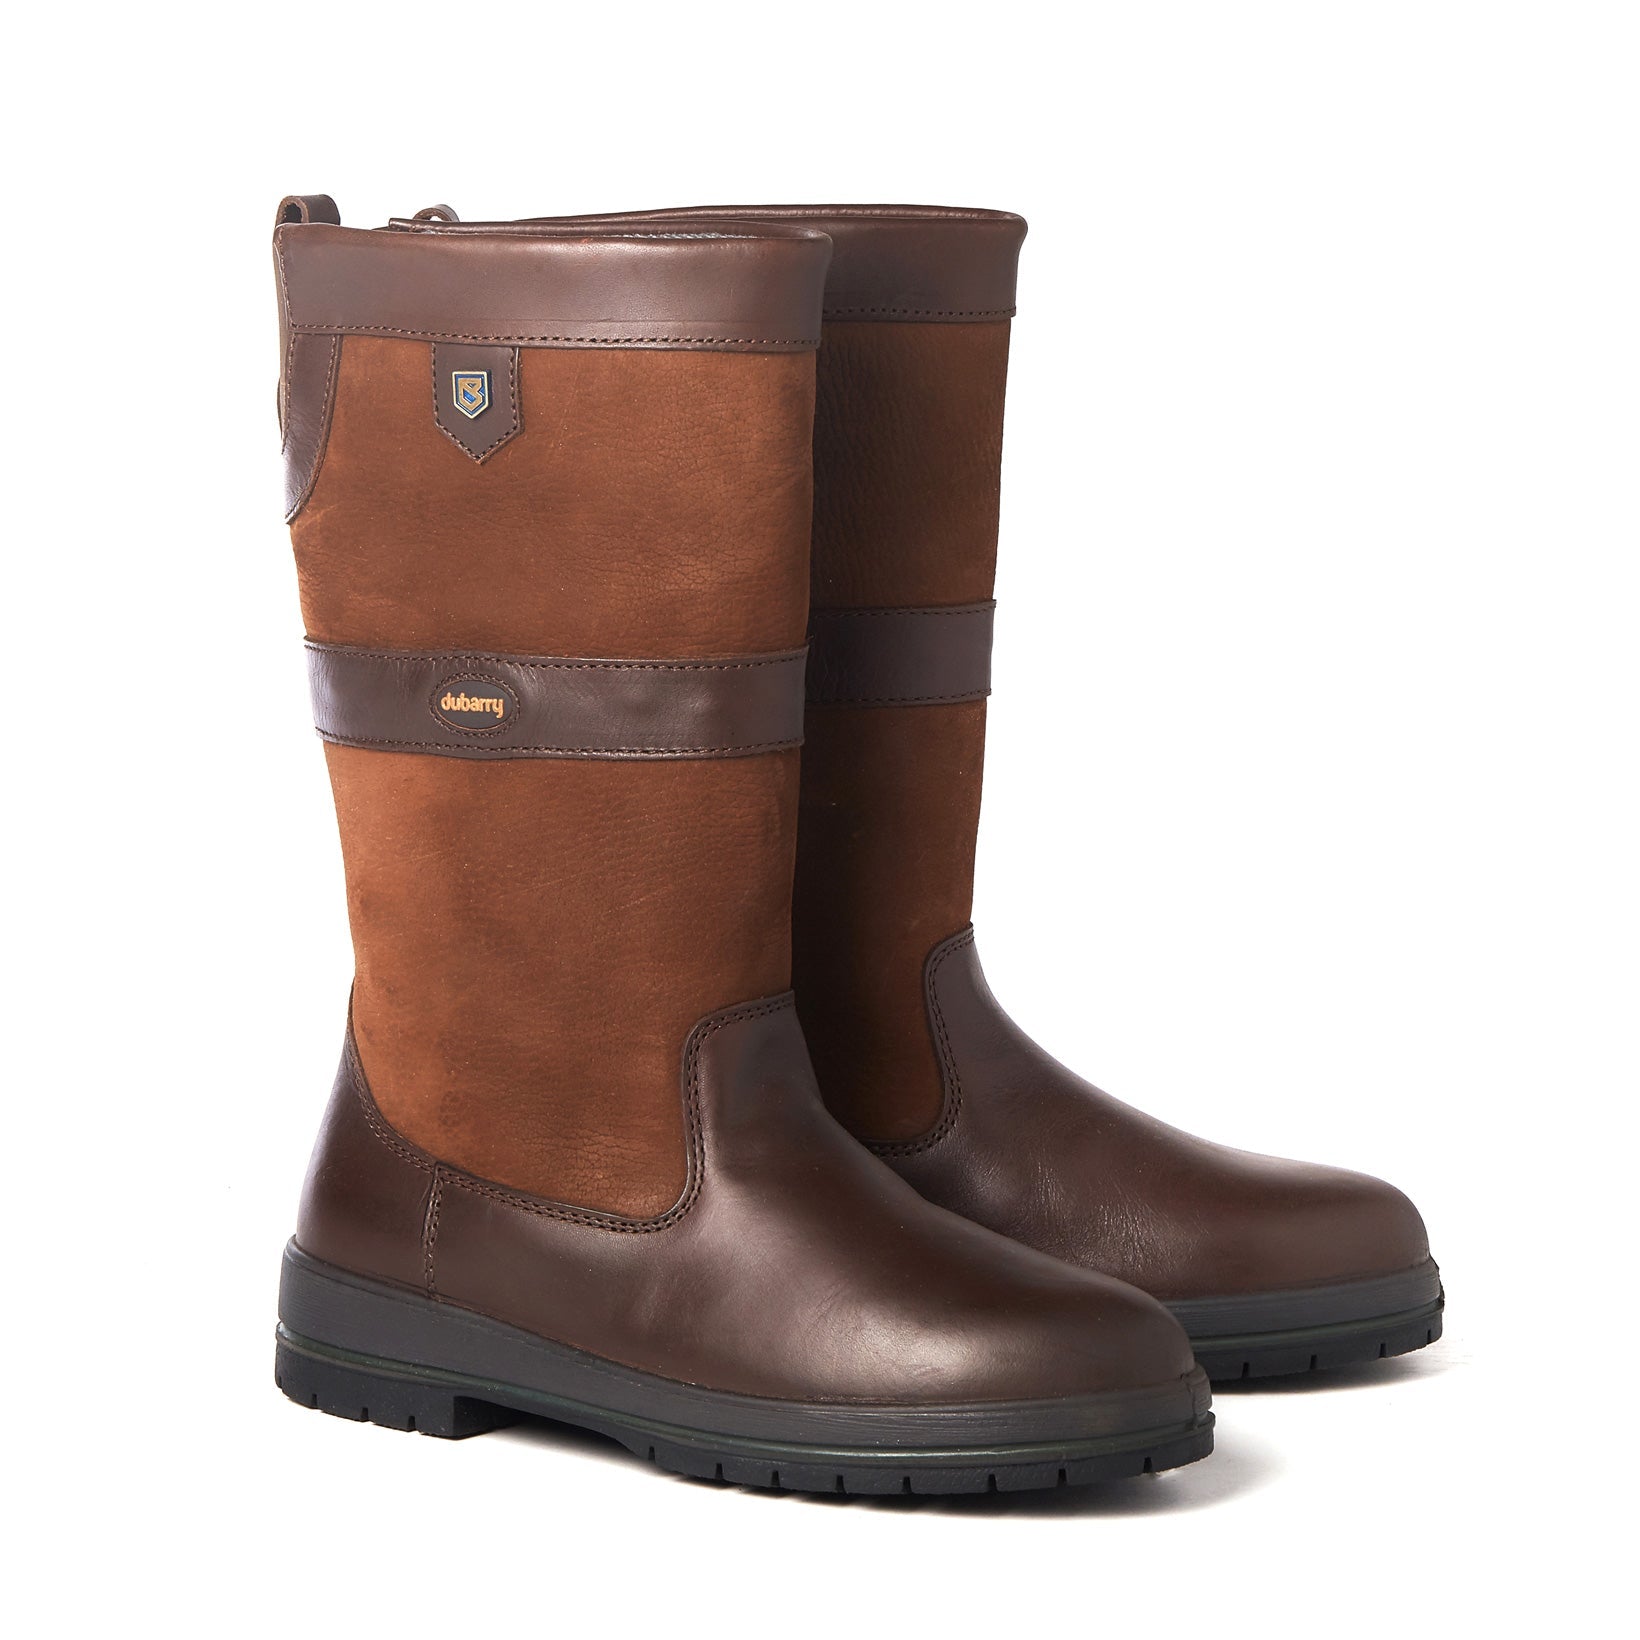 Kildare Country Boots-Dubarry-Conrad Hasselbach Shoes & Garment